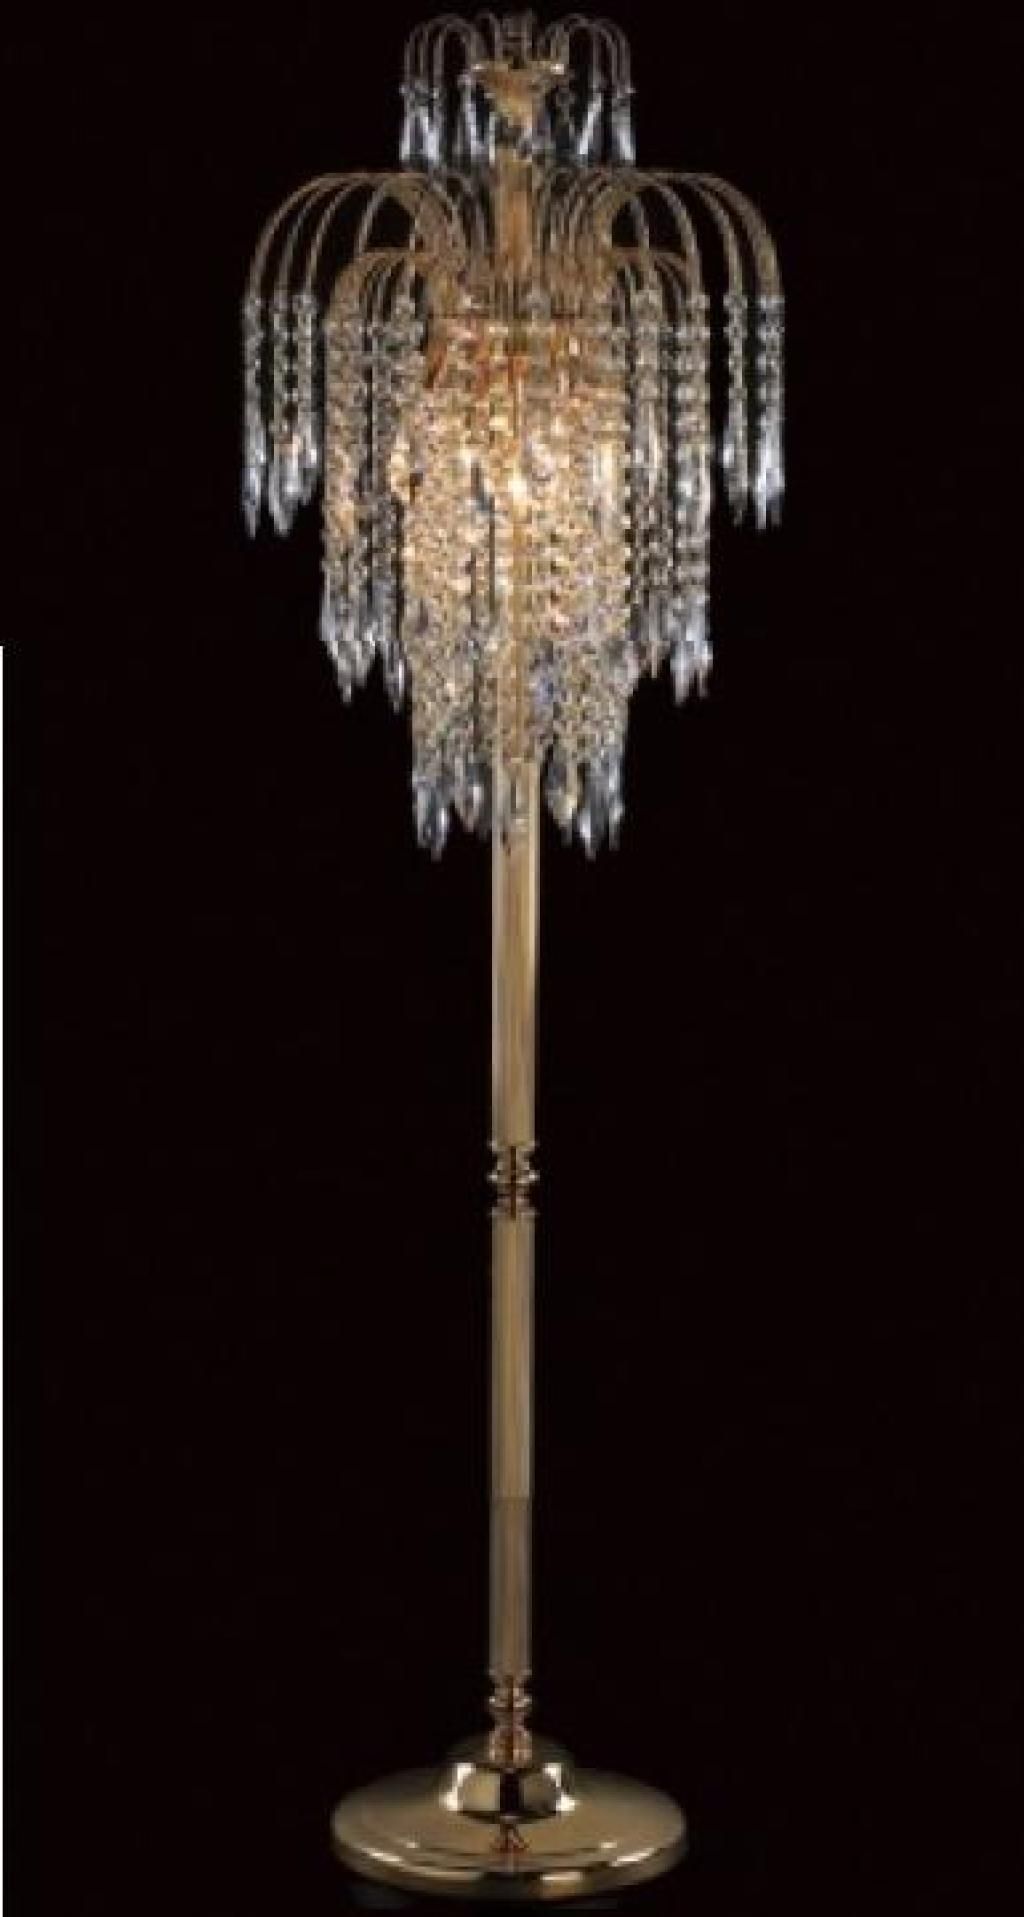 Standing Chandelier Floor Lamp Campernel Designs Intended For Free Standing Chandelier Lamps (View 9 of 25)